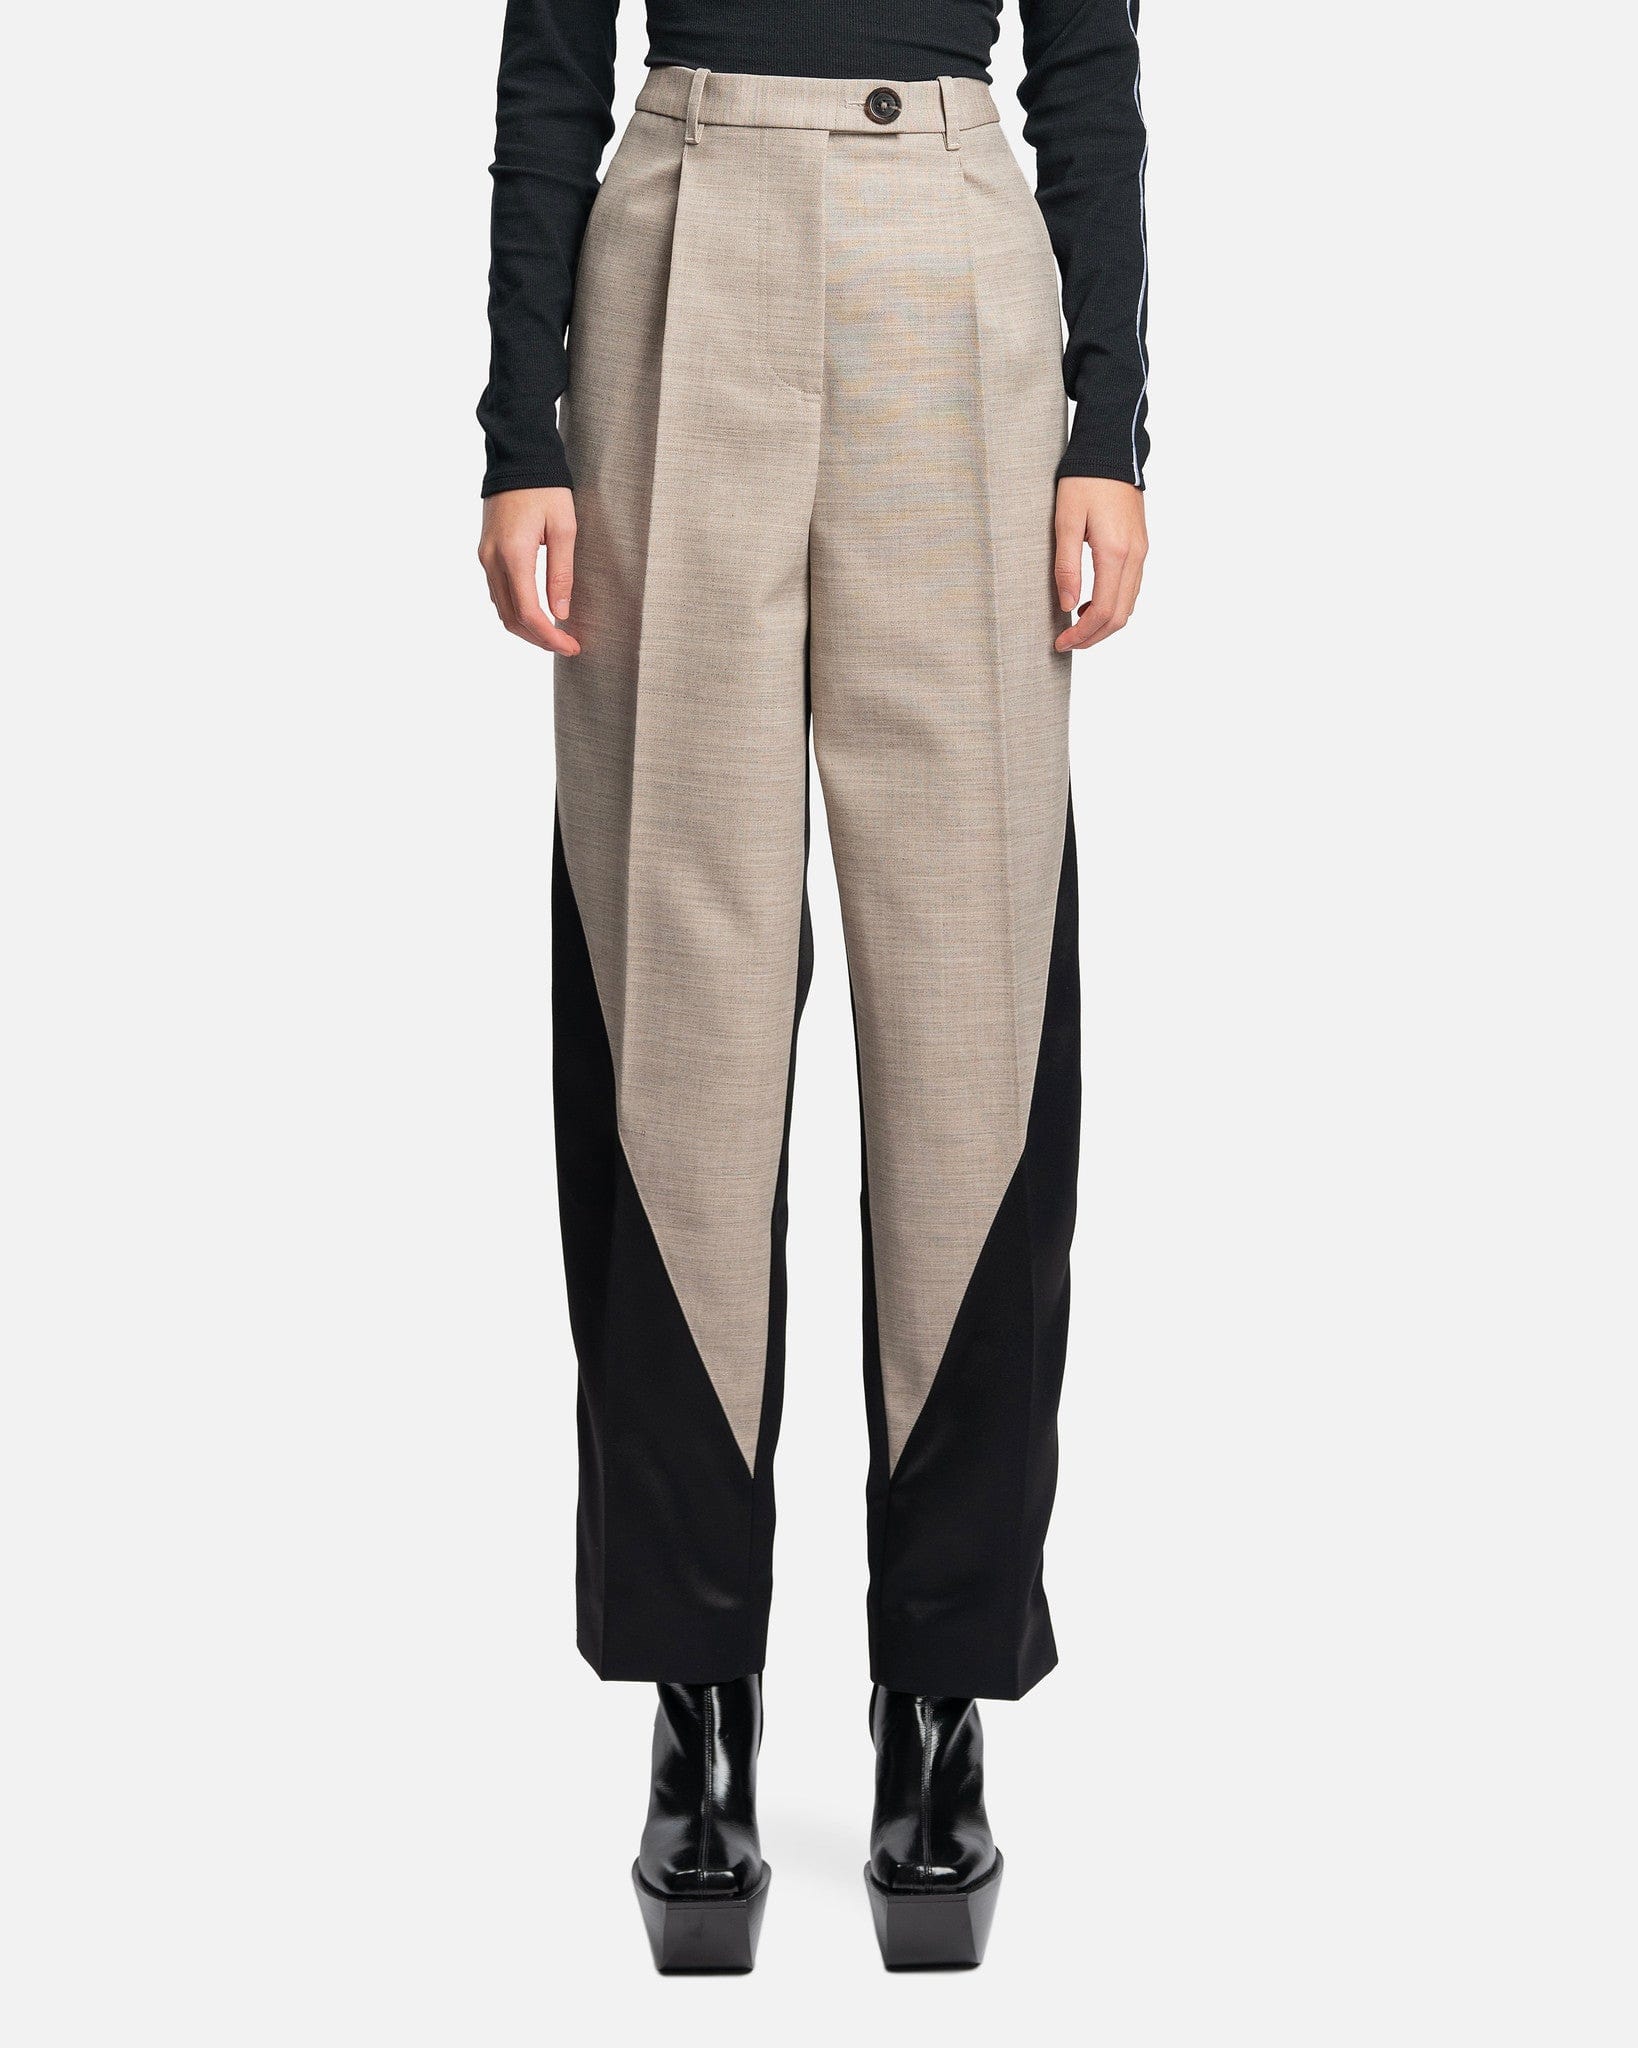 Peter Do Women Pants Combo Twisted Seam Pant in Parchment/Black